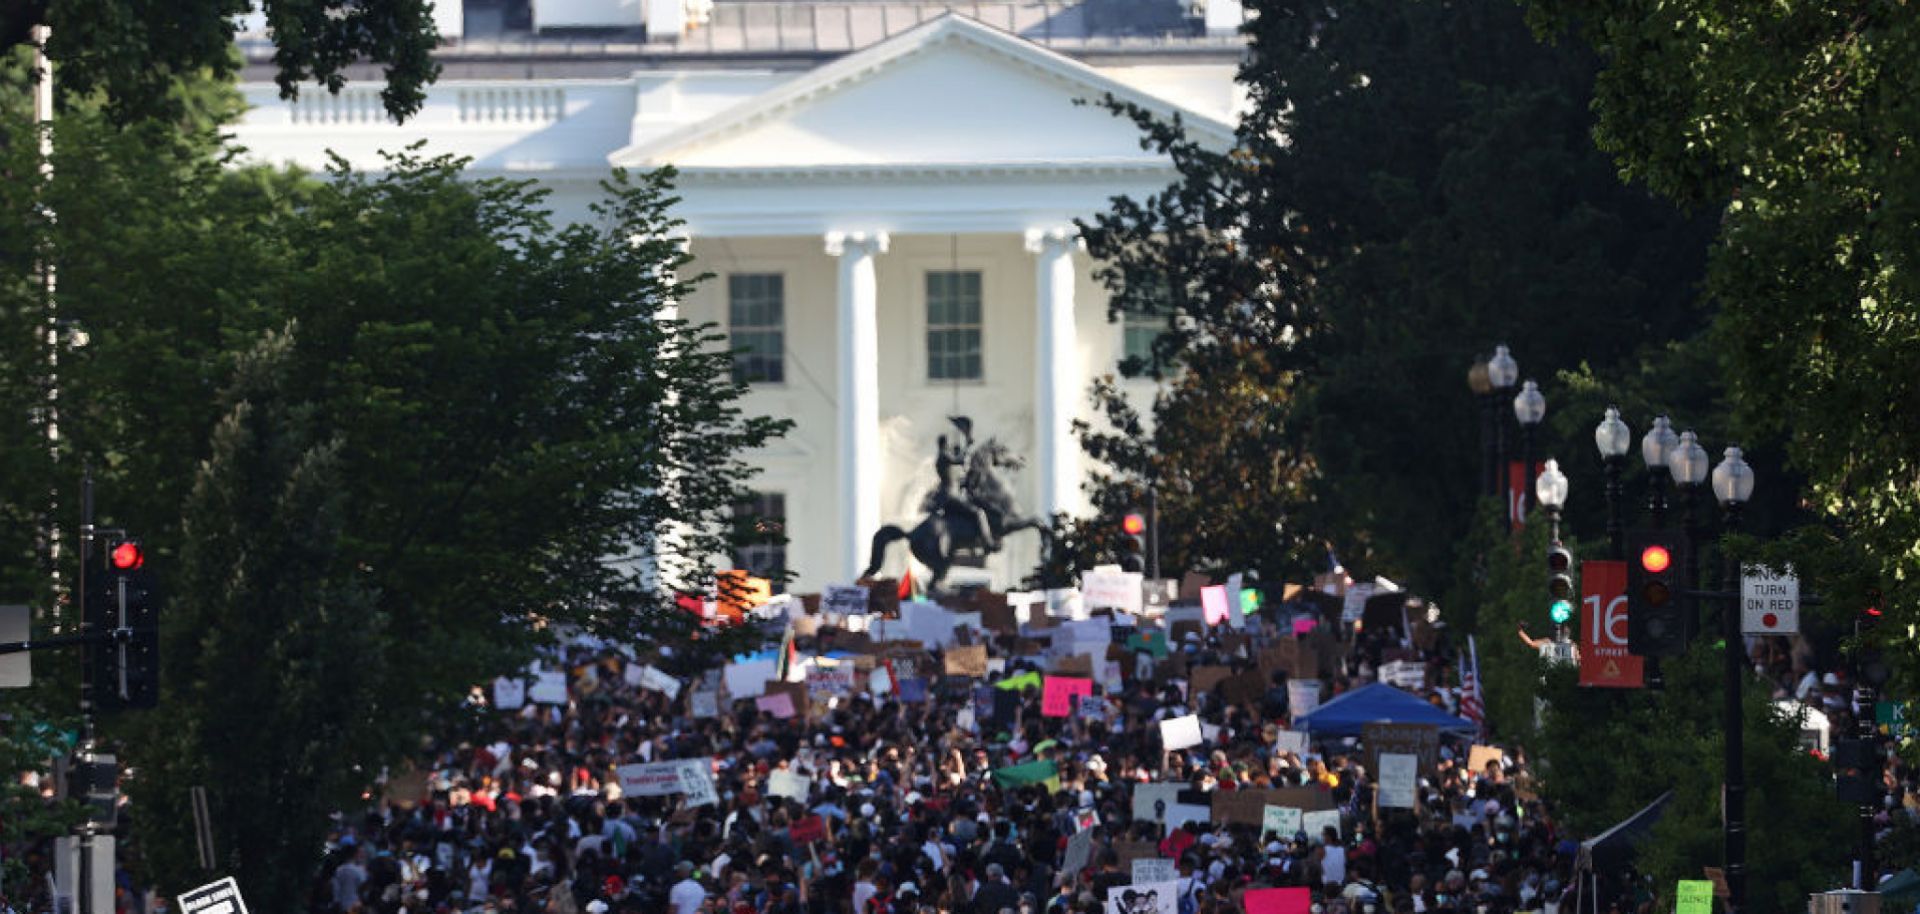 Demonstrators protest police brutality and racism on June 6, 2020, in Washington.